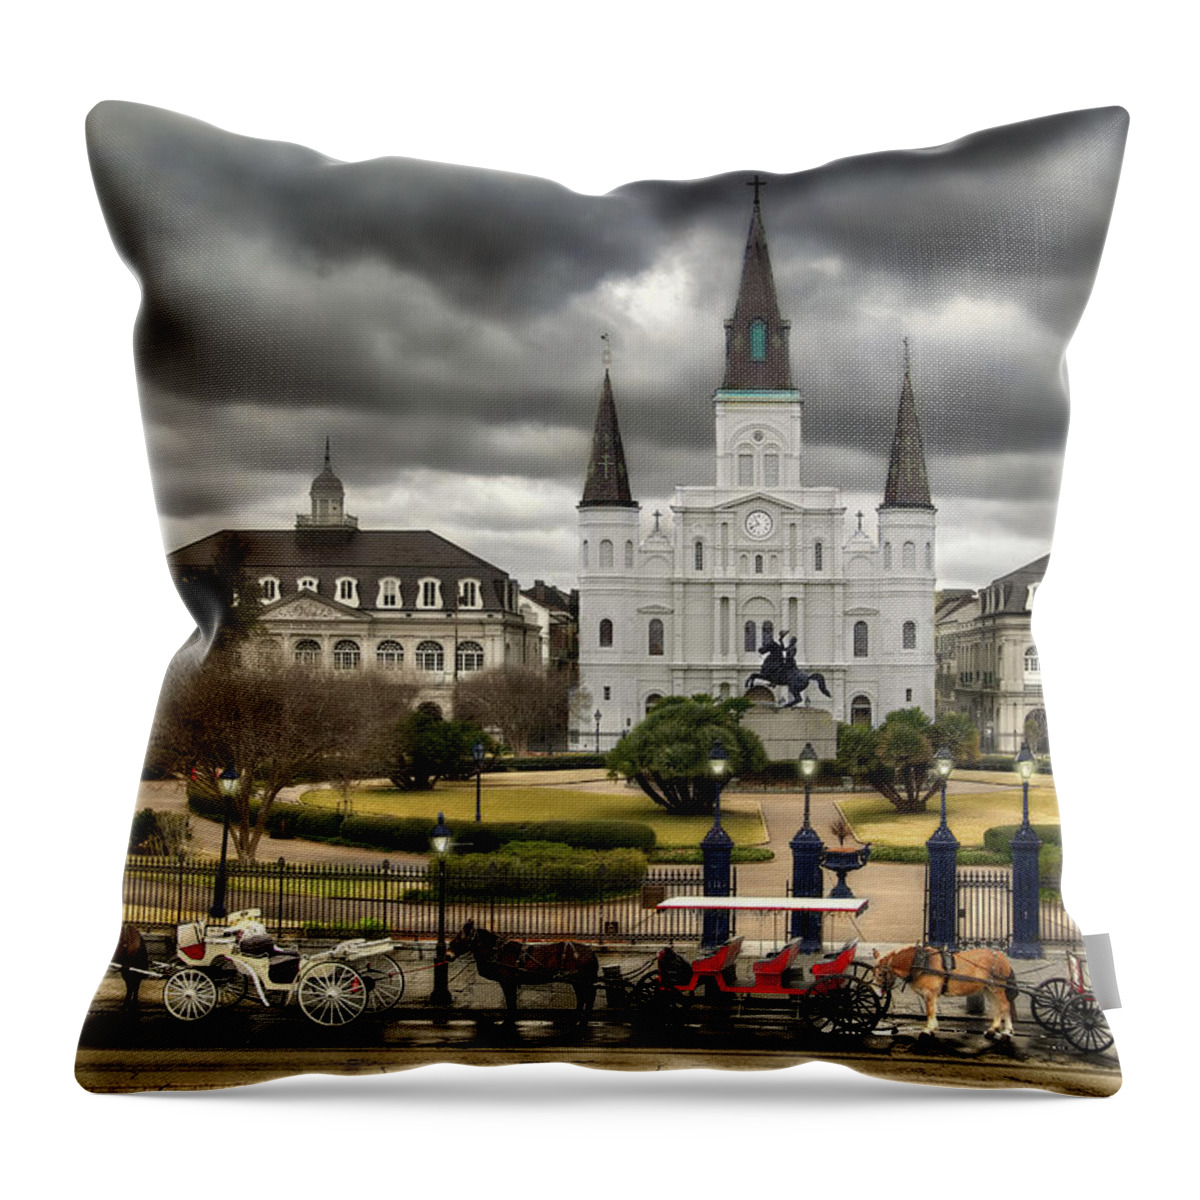 New Orlean Throw Pillow featuring the digital art Jackson Square New Orleans by Don Lovett